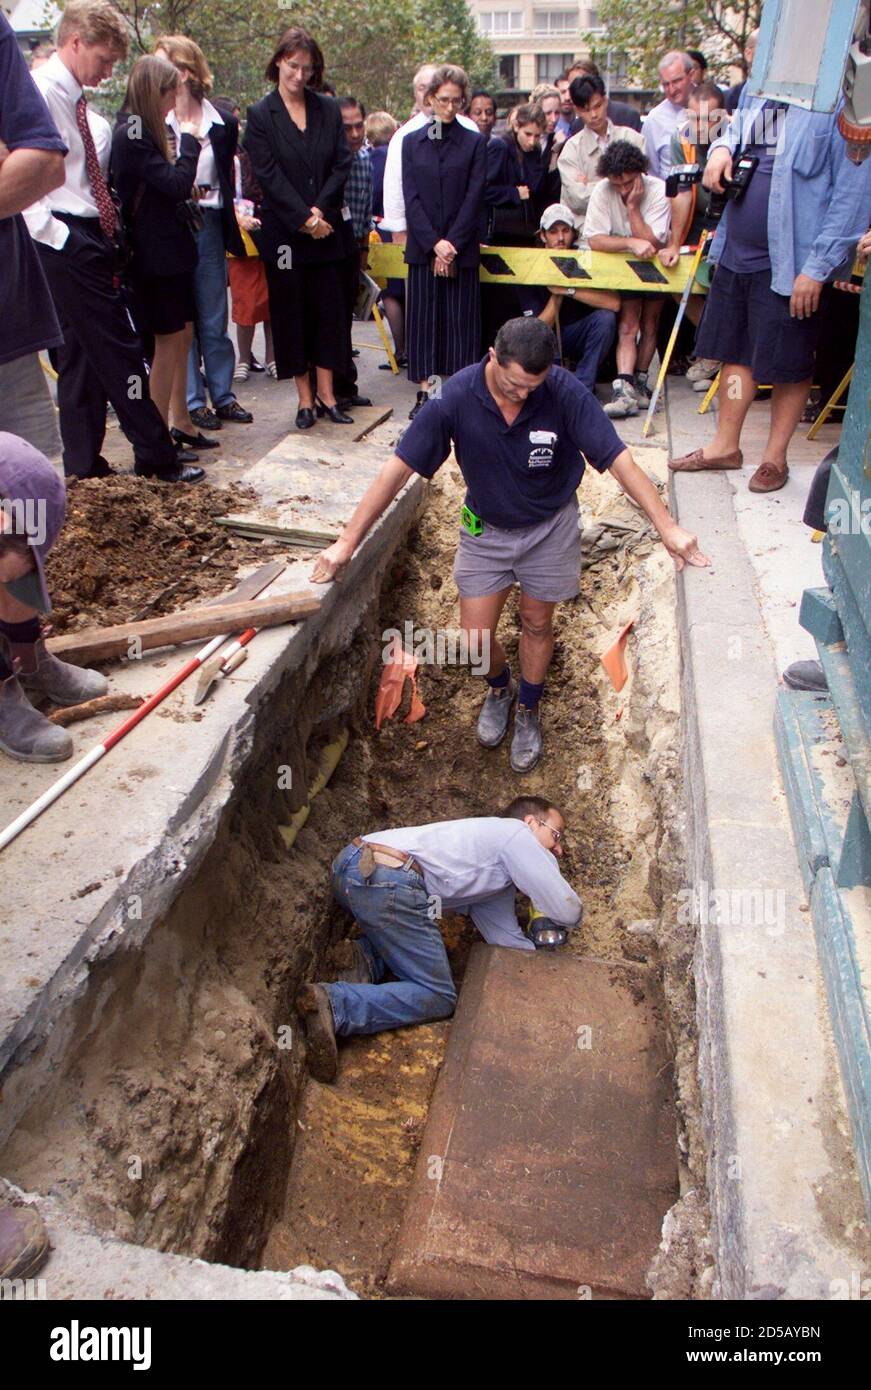 Archaeologist Peter Douglas uses a torch to look under a 196-year-old colonial gravestone in Sydney's business district March 31 as workers look-on during their lunch break. The headstone, discovered recently by builders on a city construction site, marks the grave of three-month-old William Kemp, the baby son of Captain Anthony Kemp one of colonial Australia's highest ranked military officers.  MDB/TAN Stock Photo